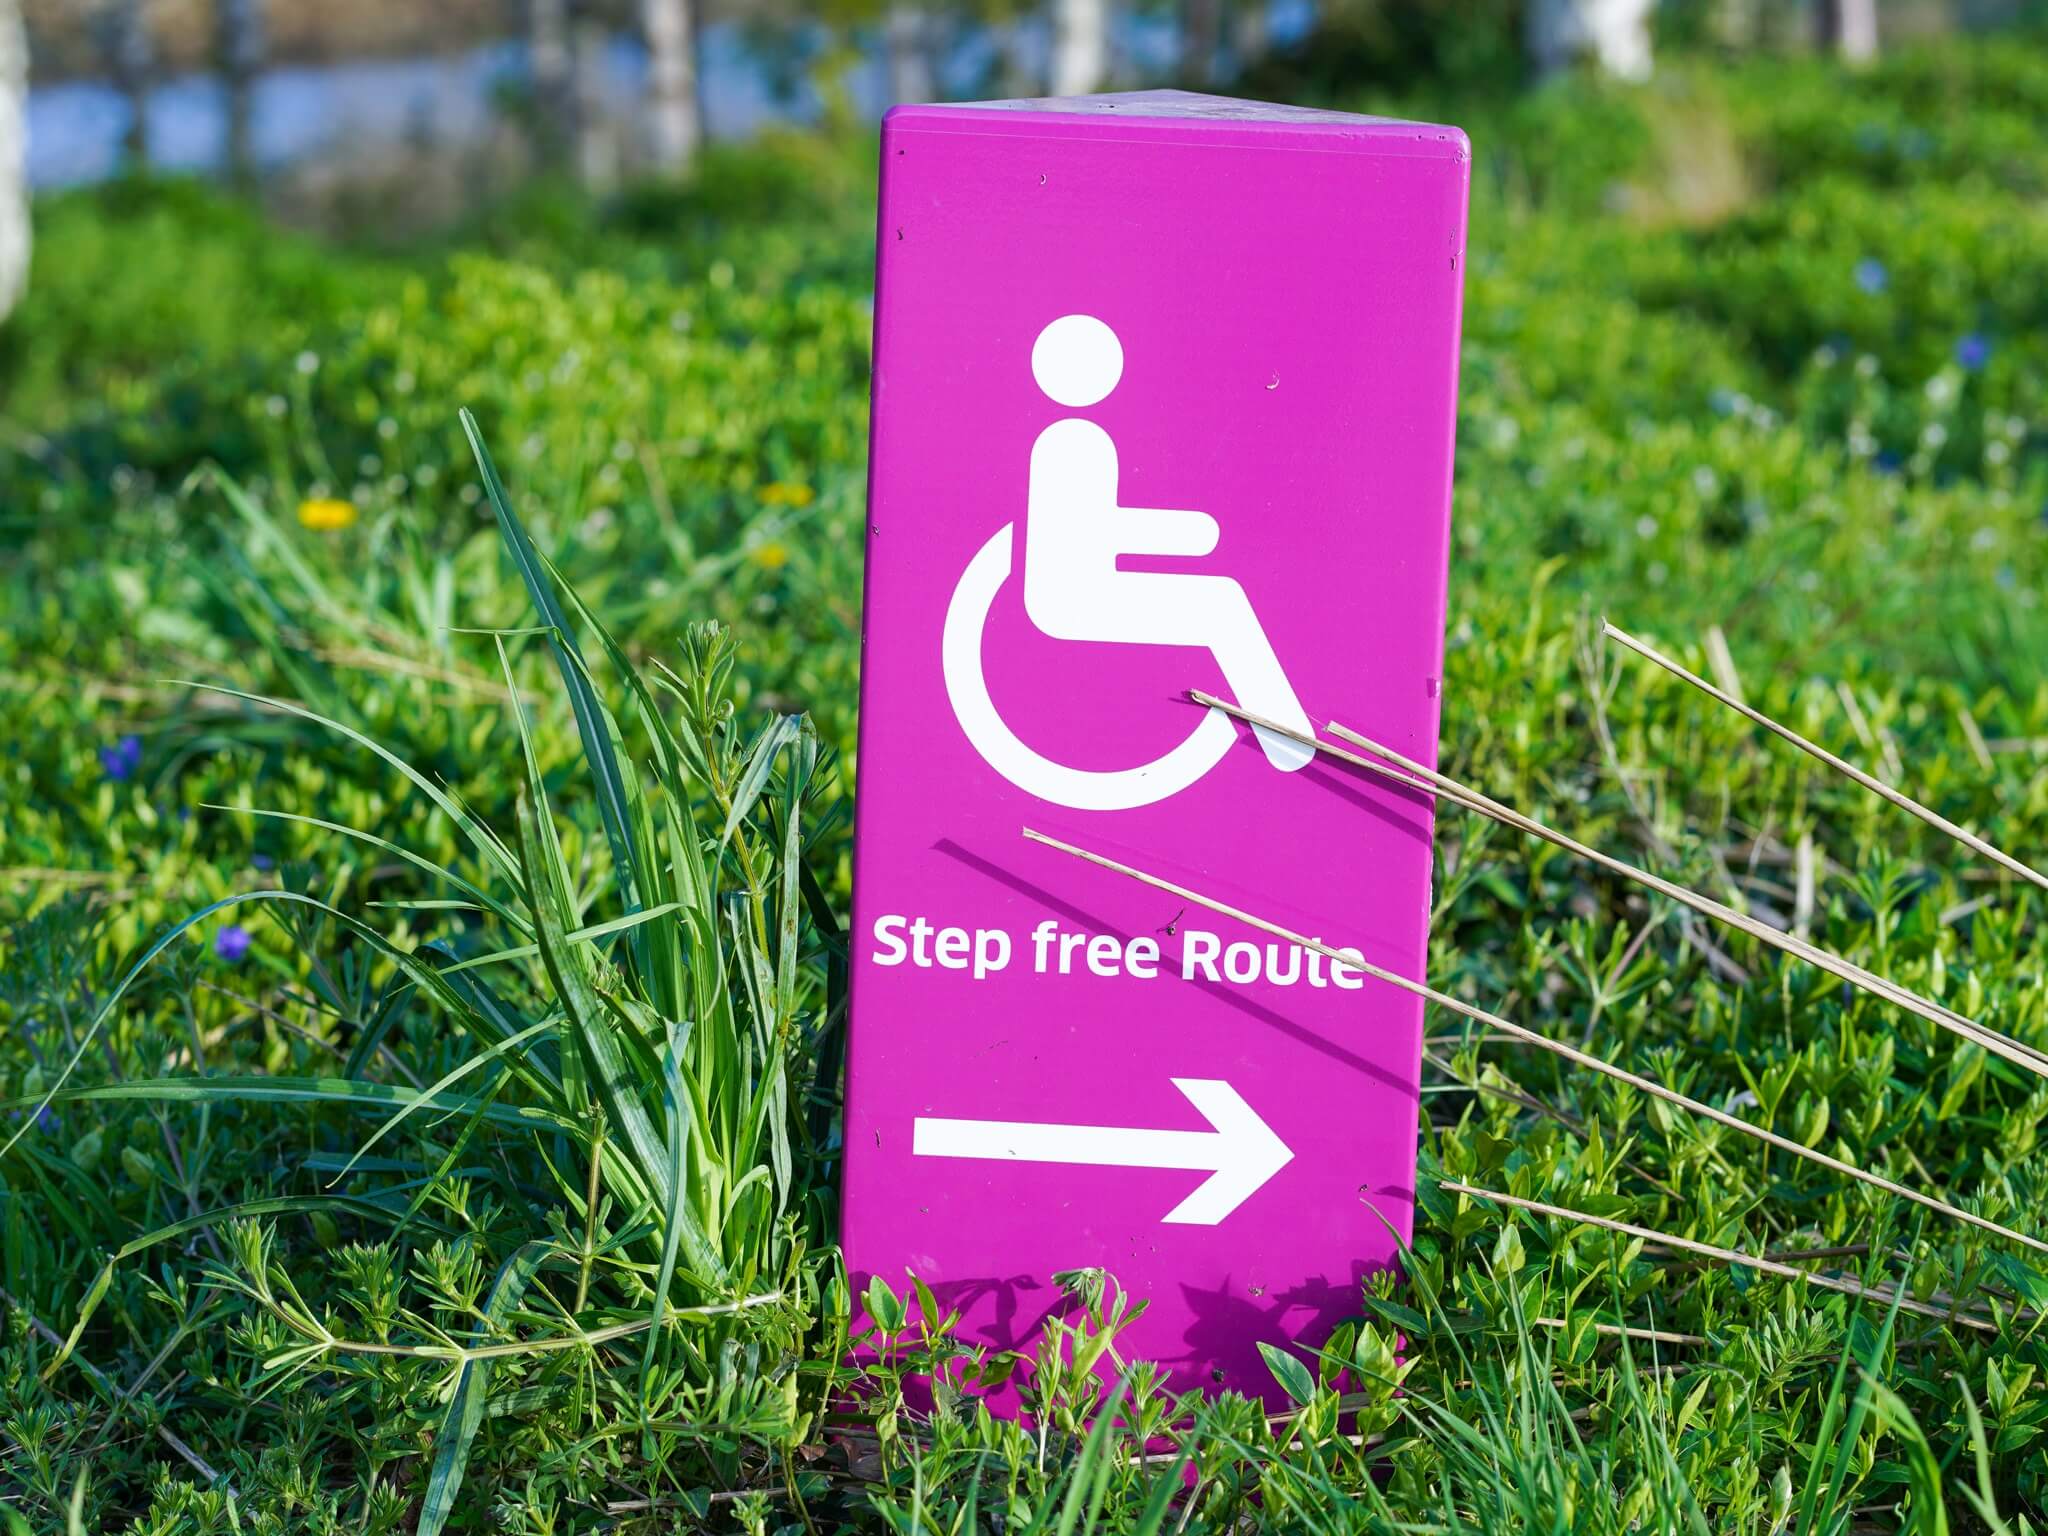 wheelchair accessible sign which reads "step free route"